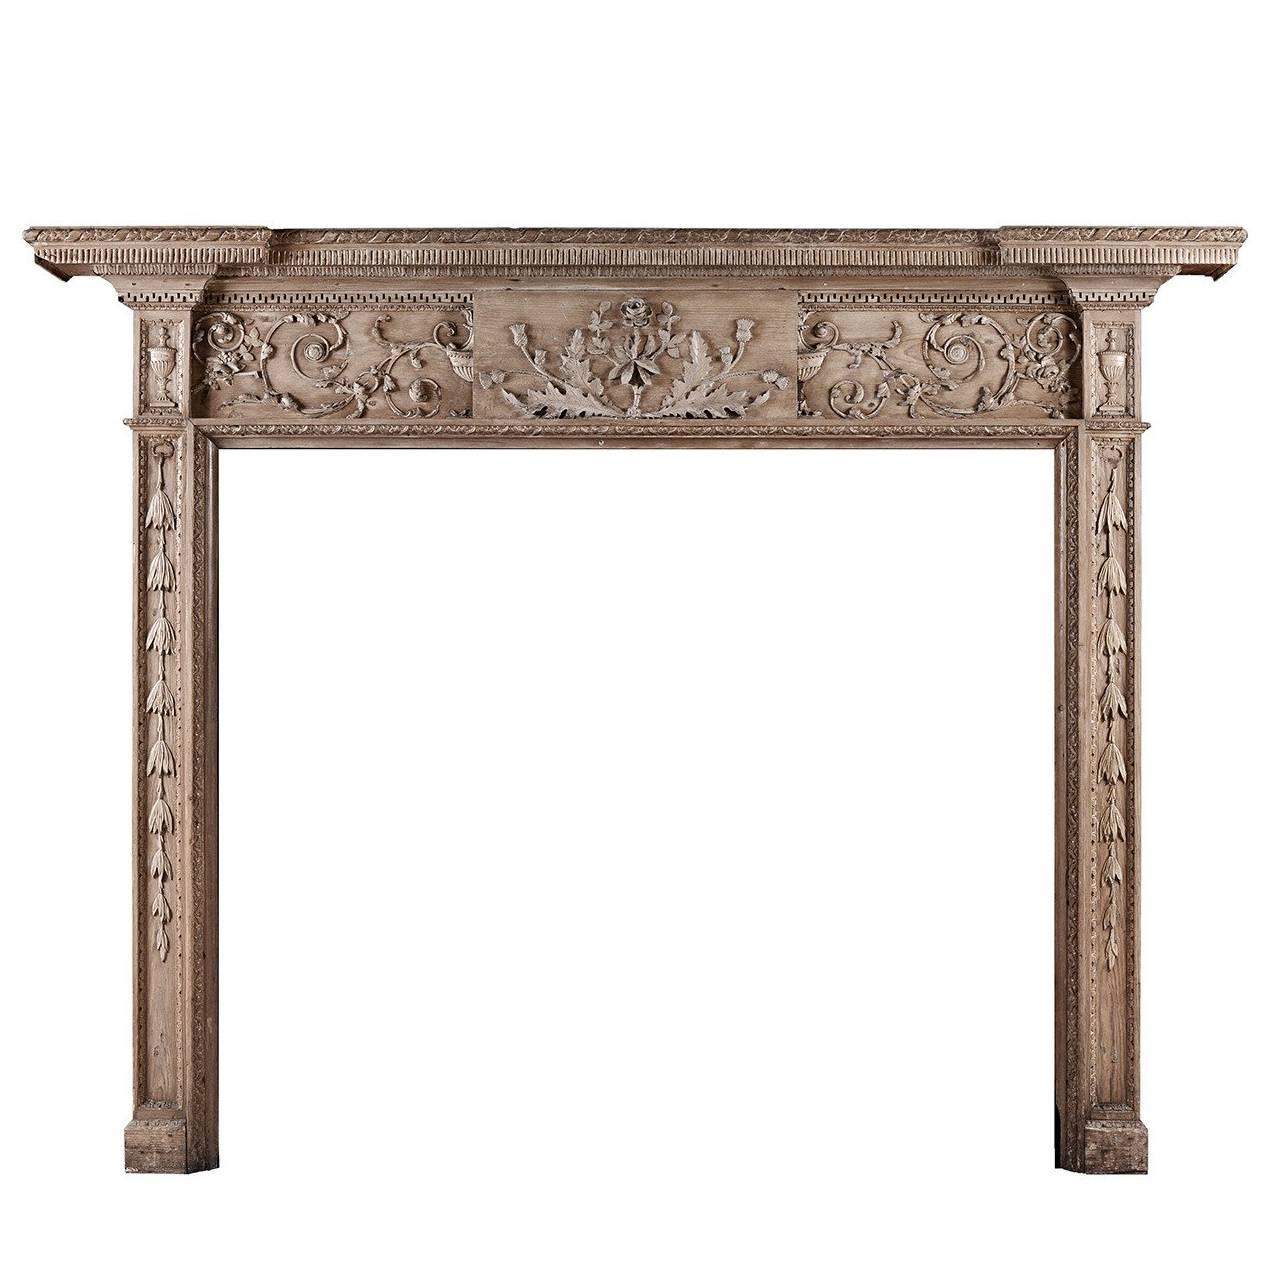 Fine Quality 18th Century Carved Wood Mantelpiece / Fireplace